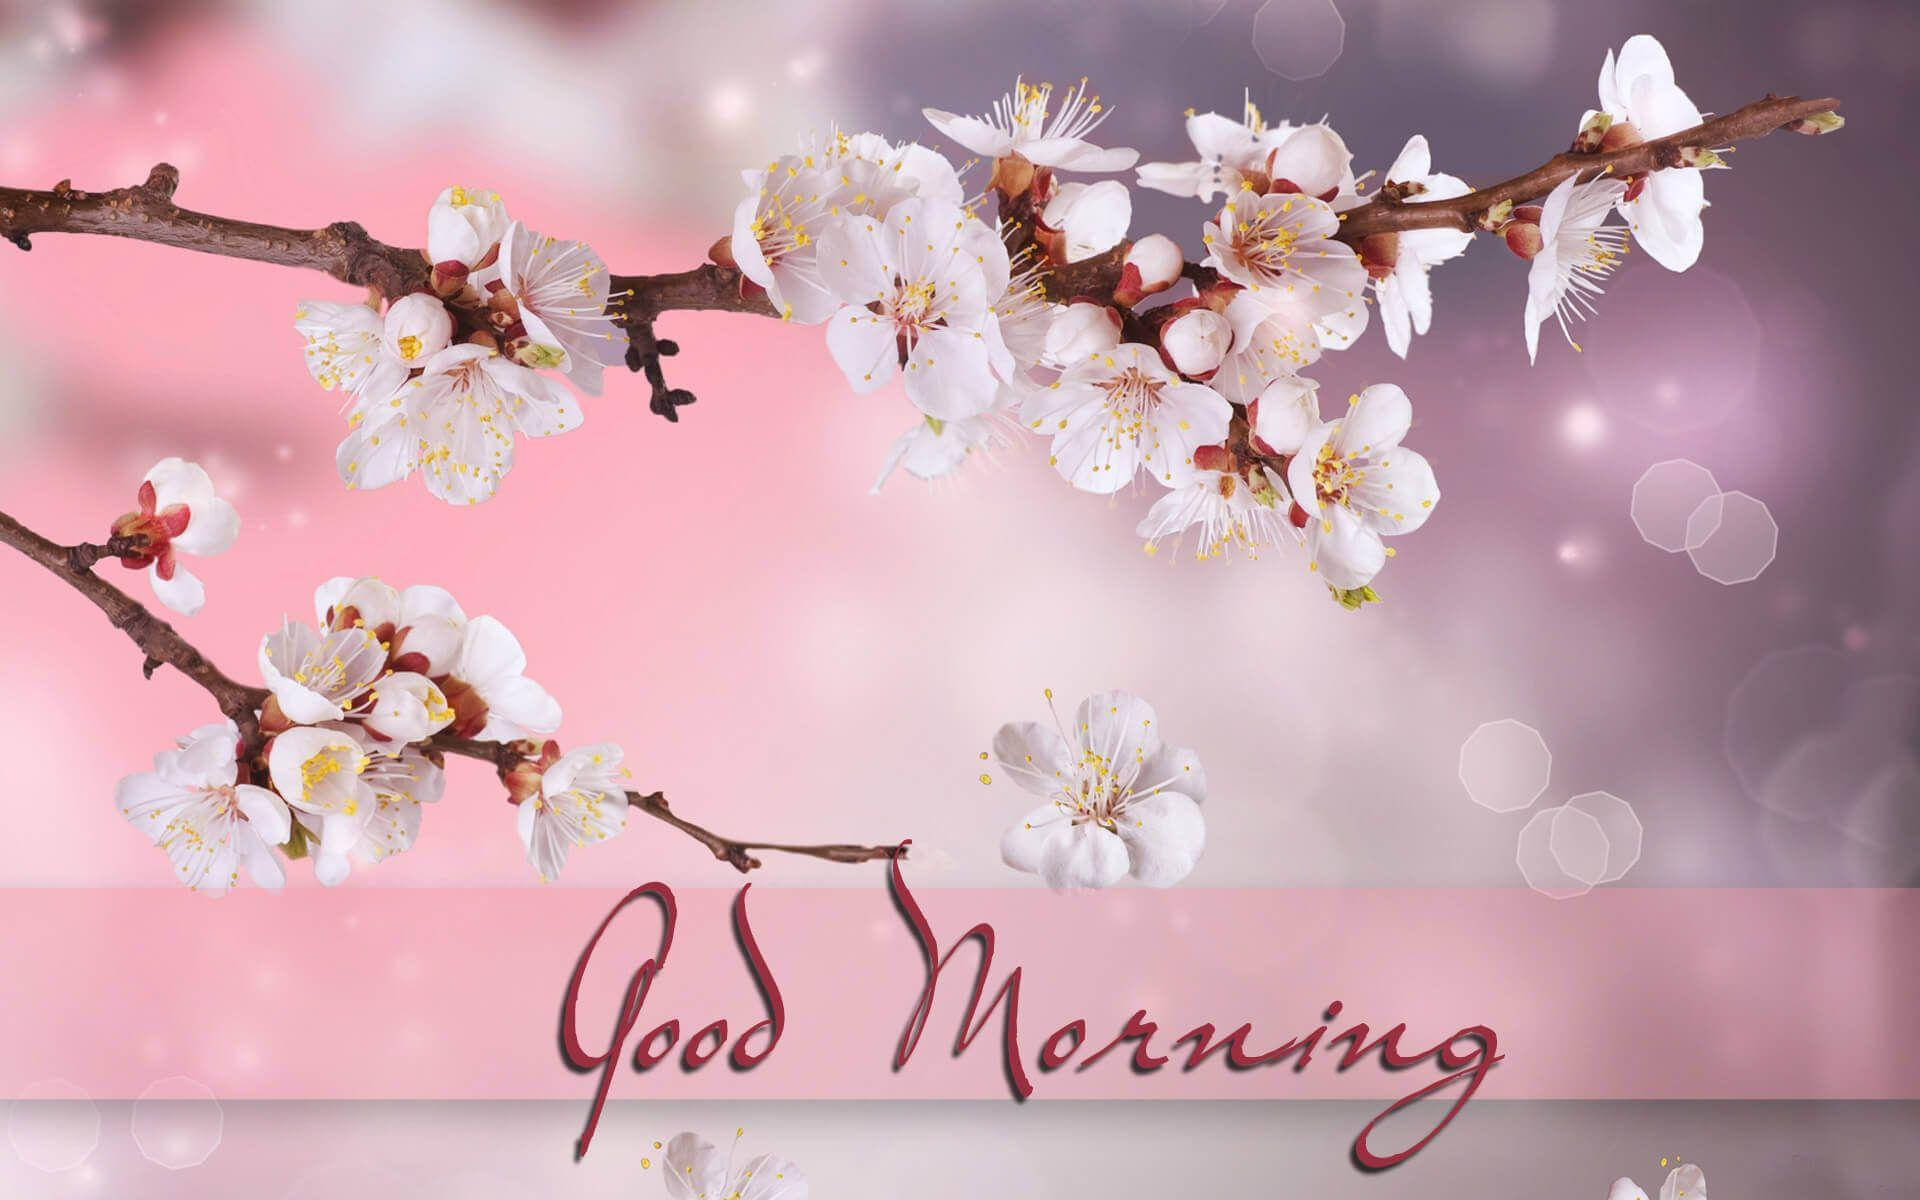 Good Morning Hd With Cherry Blossom Background